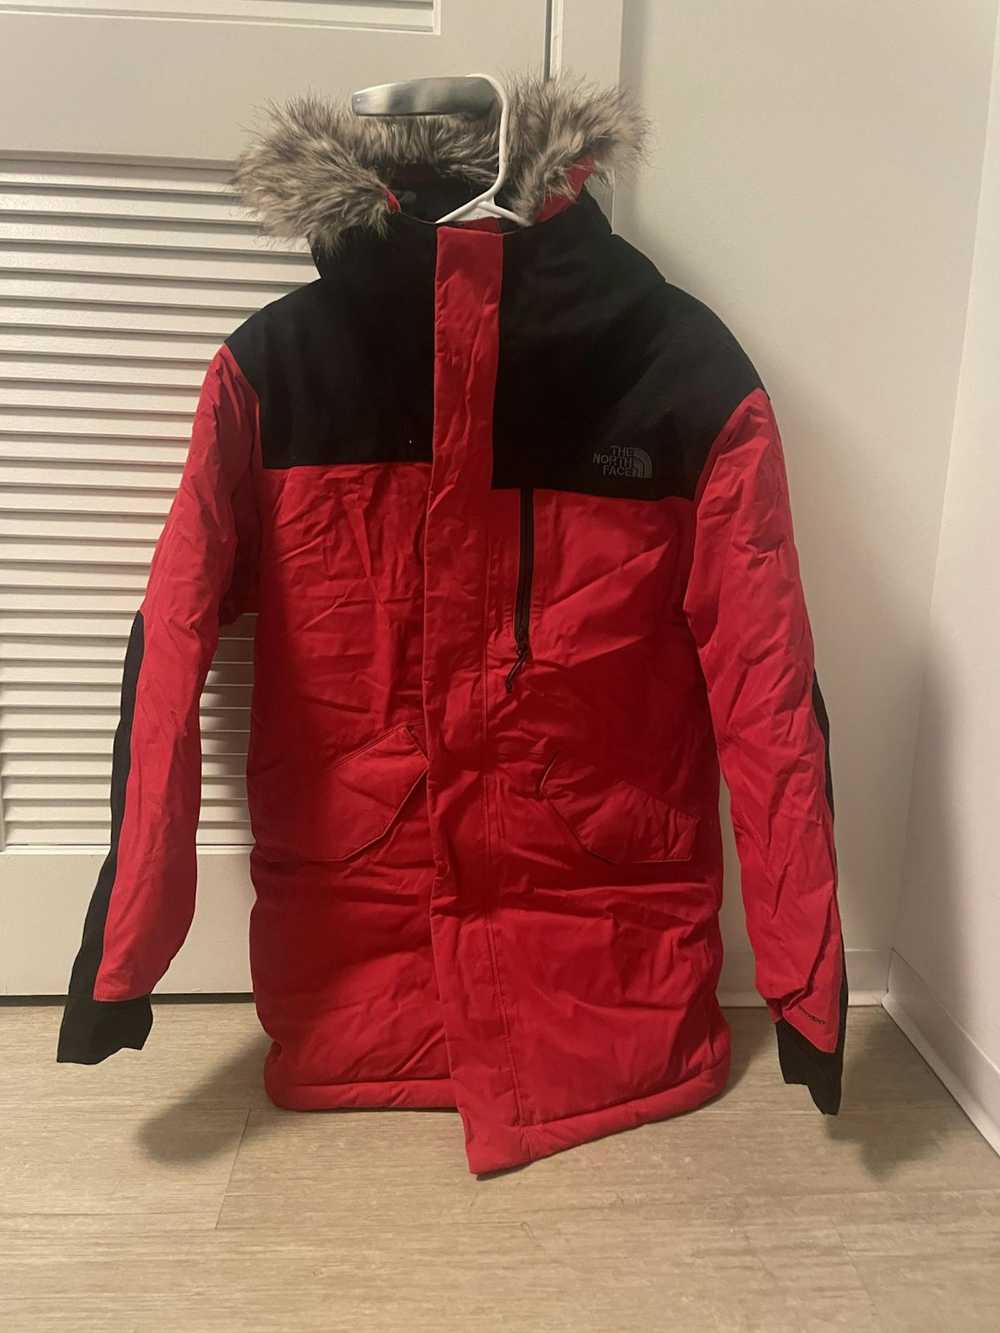 The North Face North Face Parka - image 1